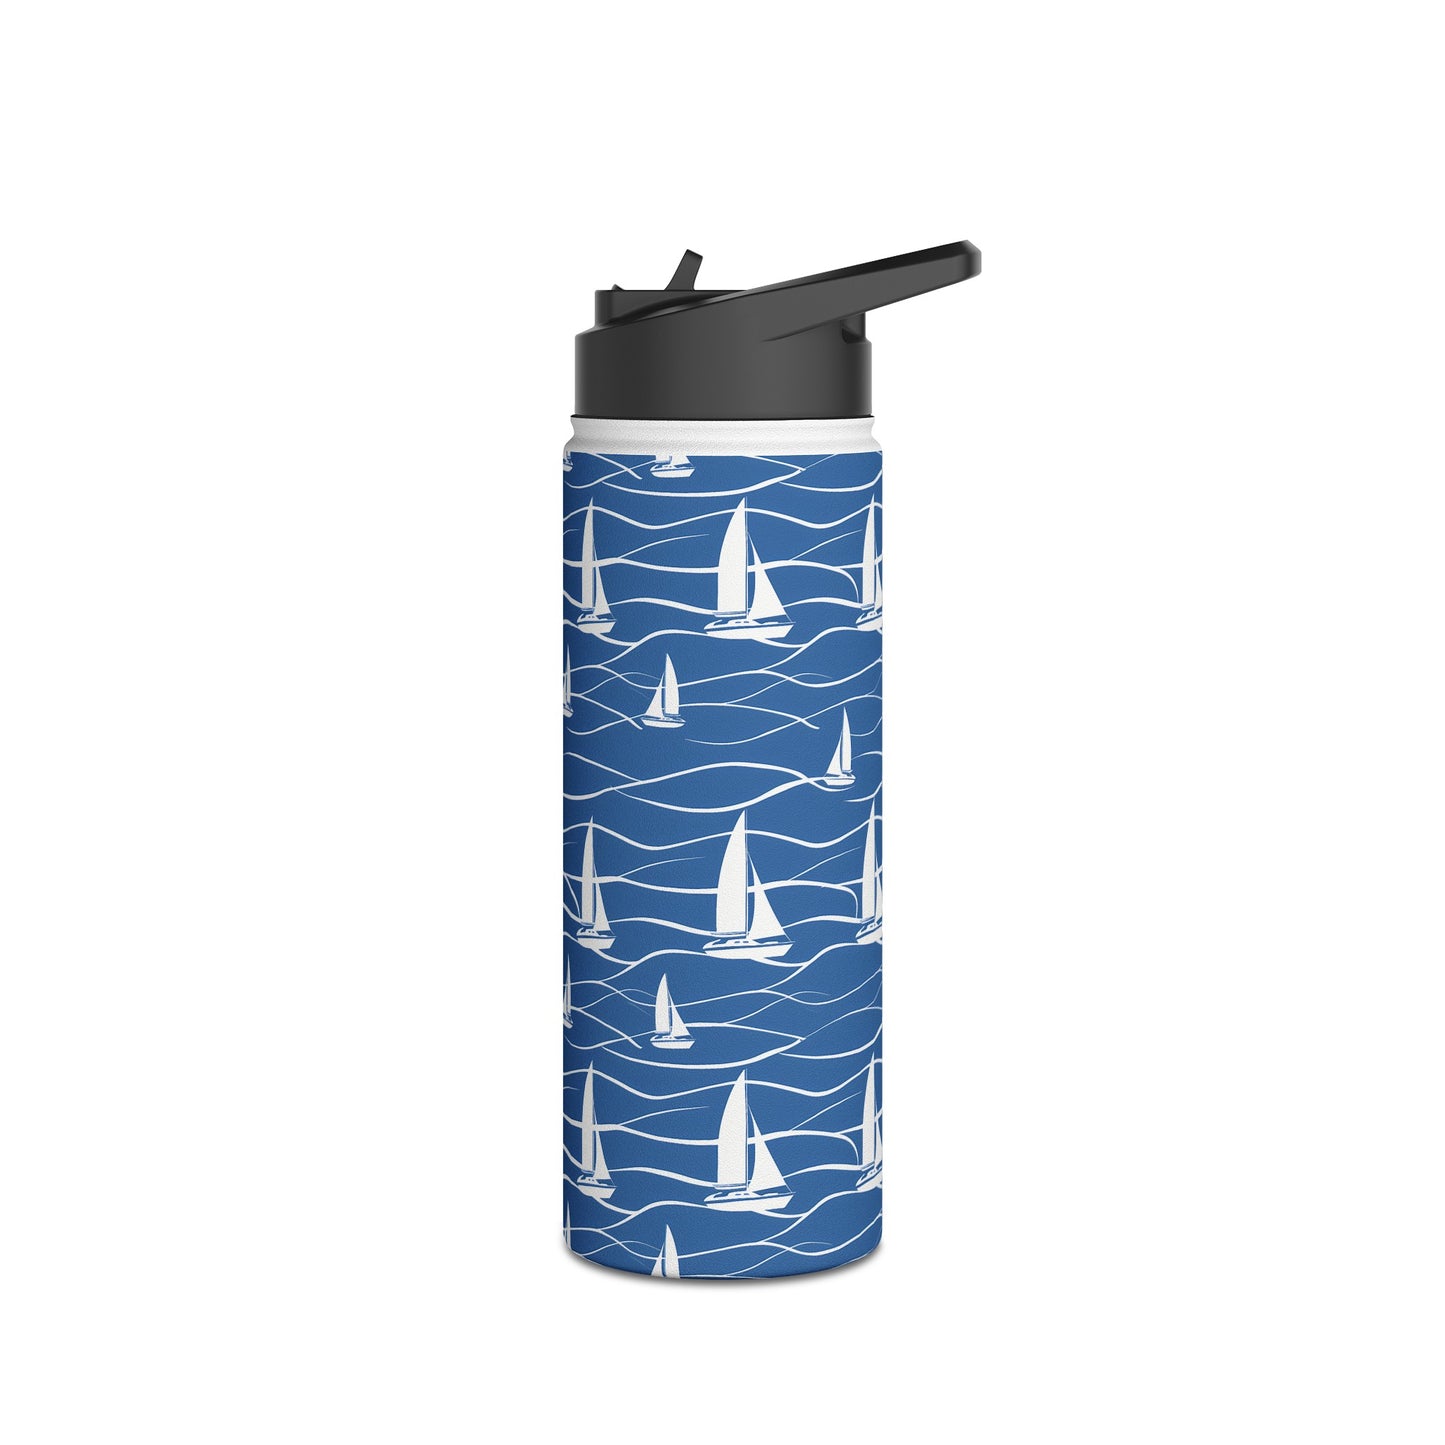 Stainless Steel Water Bottle Thermos, 18oz, Sailboats - Double Wall Insulation Keeps Drinks Hot or Cold